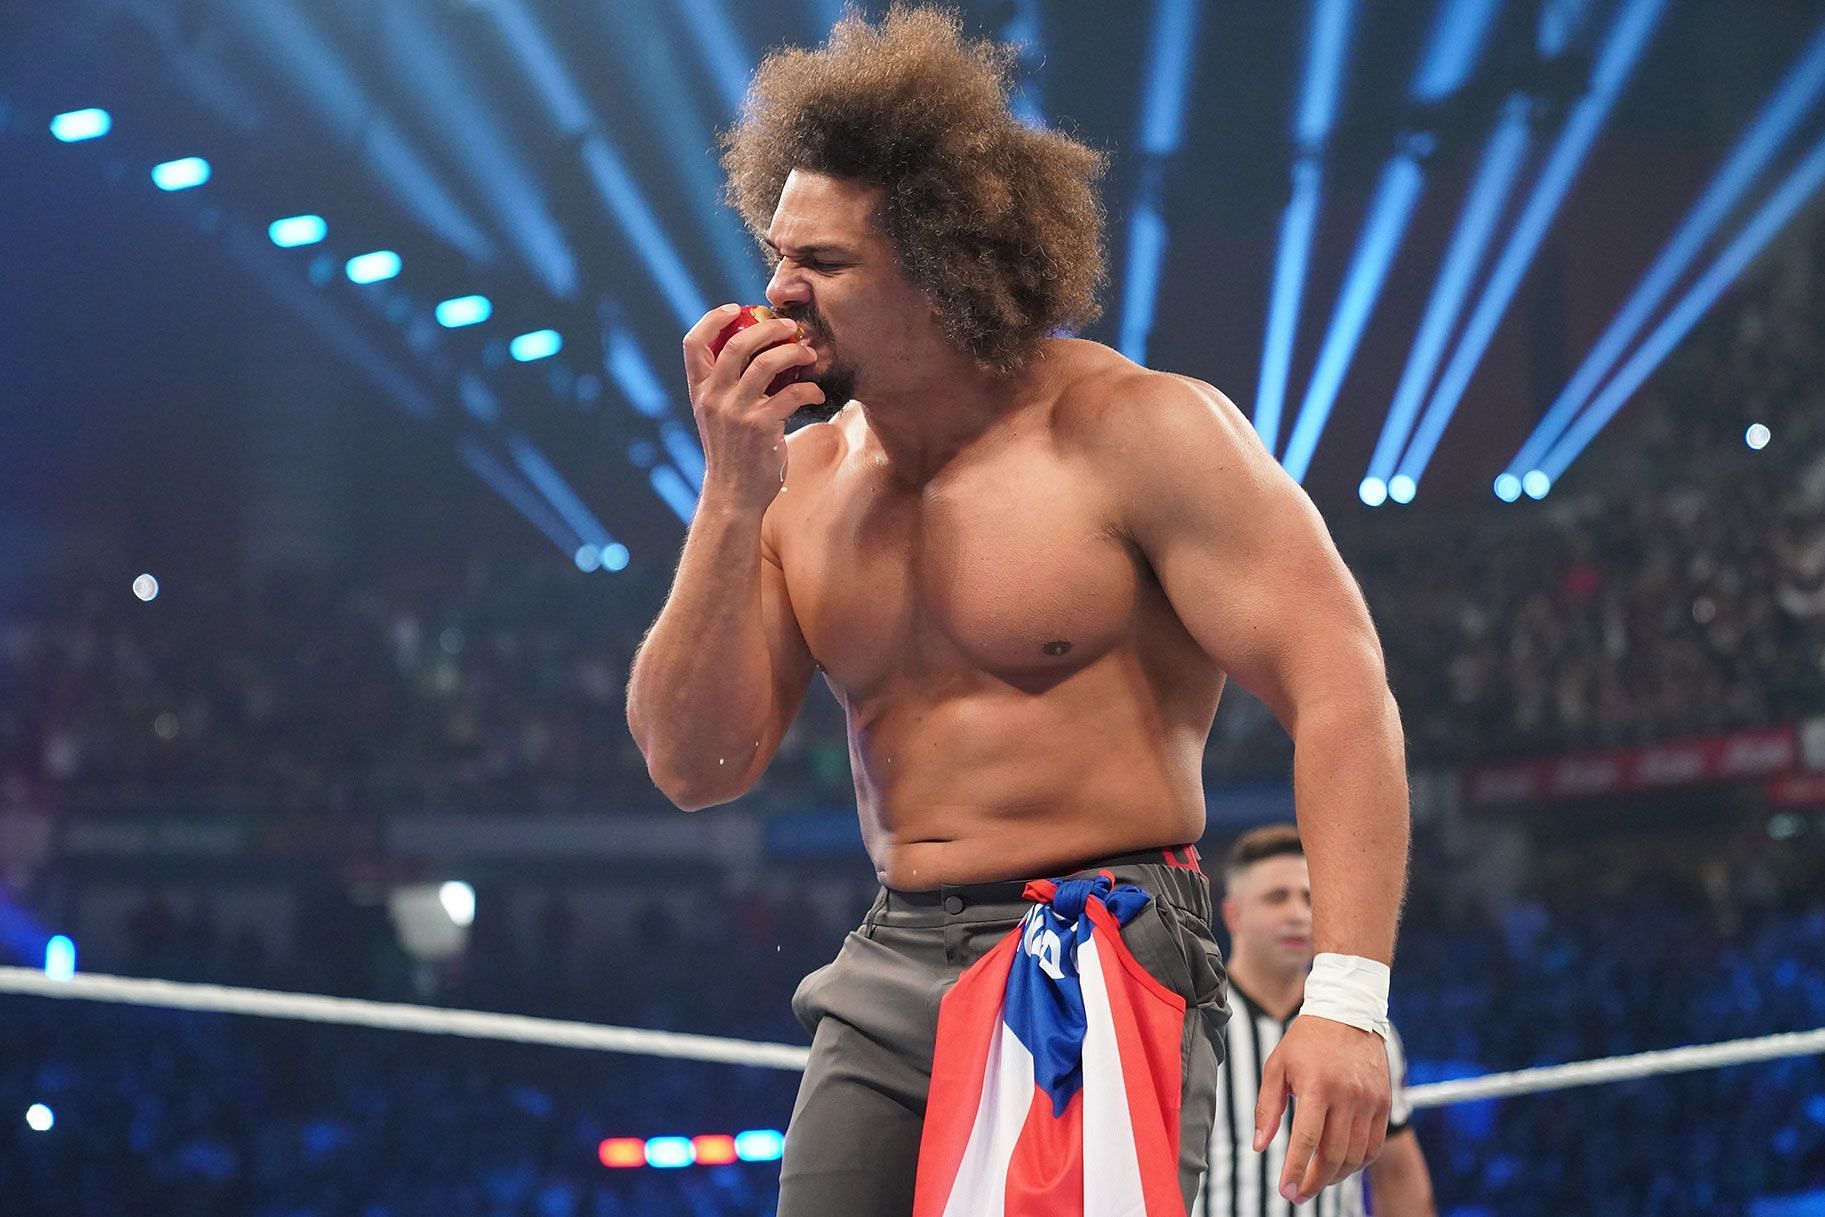 The fans cheered Carlito upon his return in May.